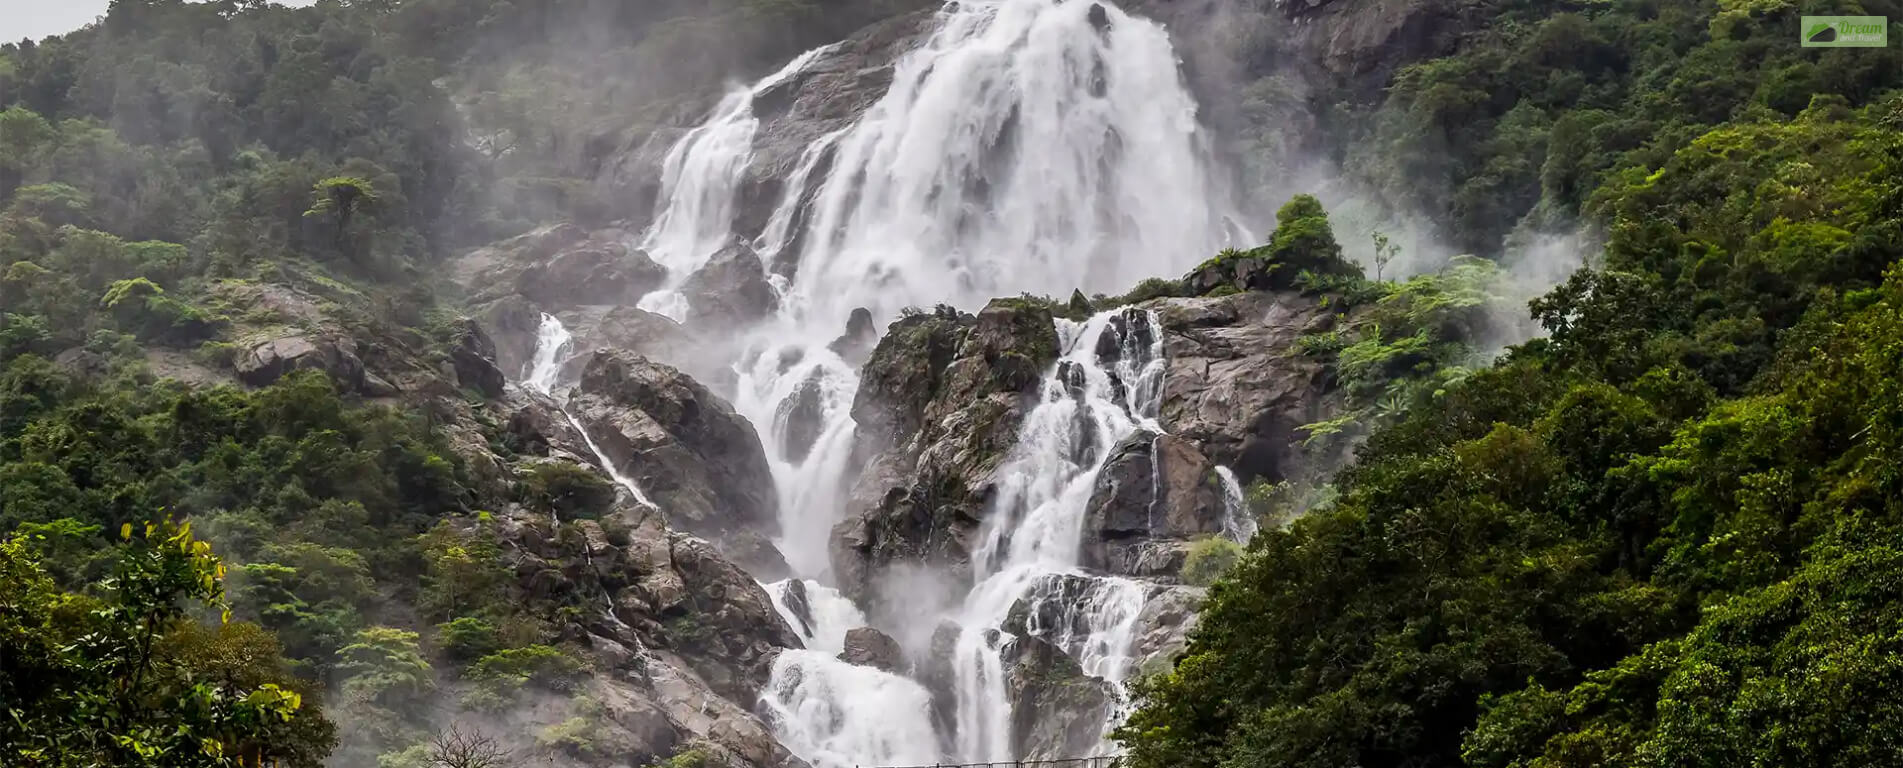 The Best Ways to Experience Dudhsagar Falls You Should Know